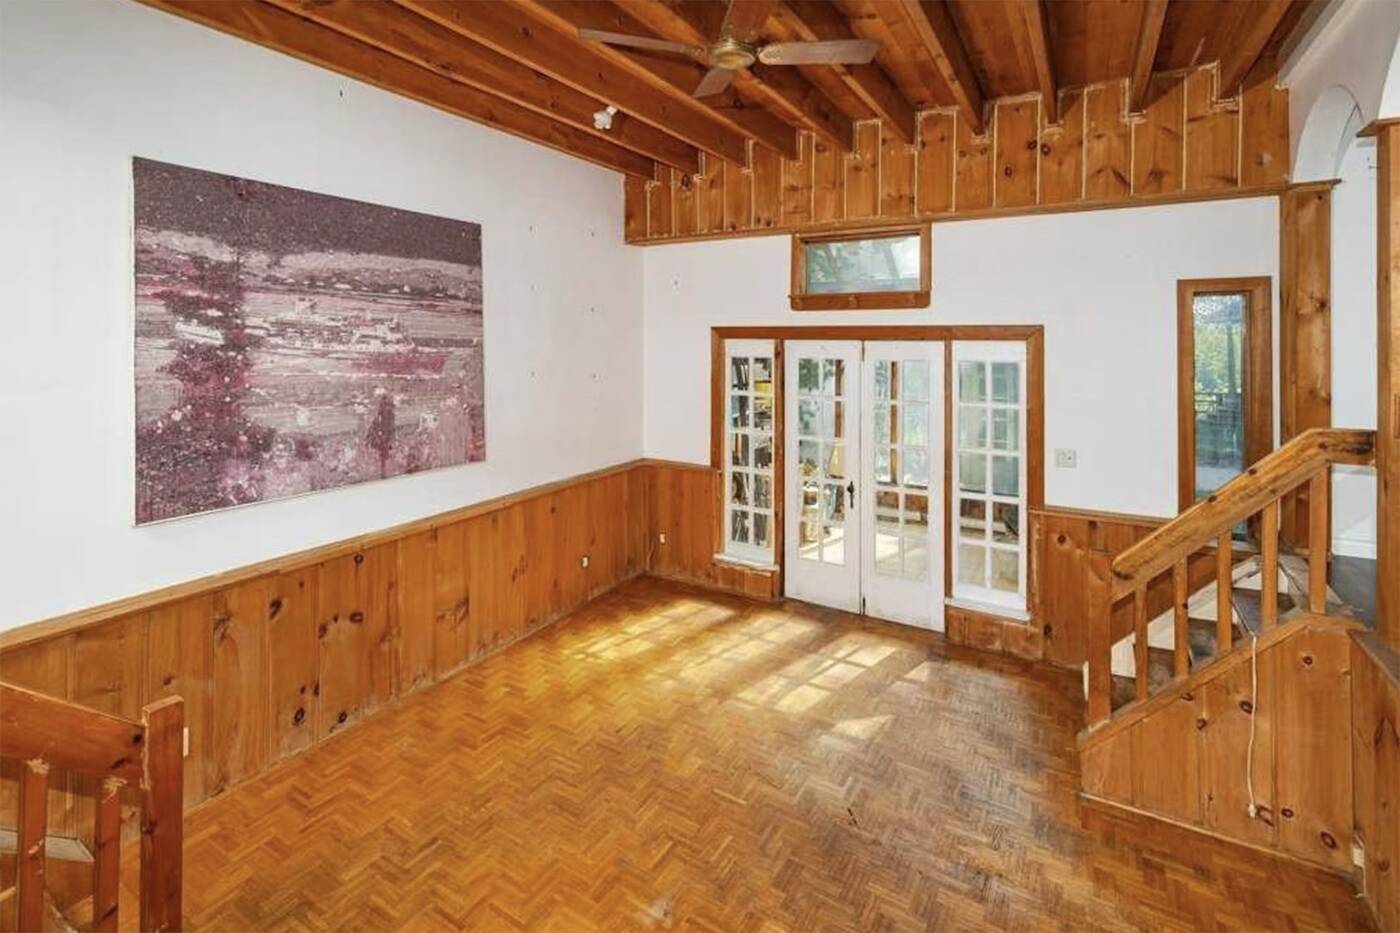 This $2.1 million home full of wood may be the weirdest one in Toronto